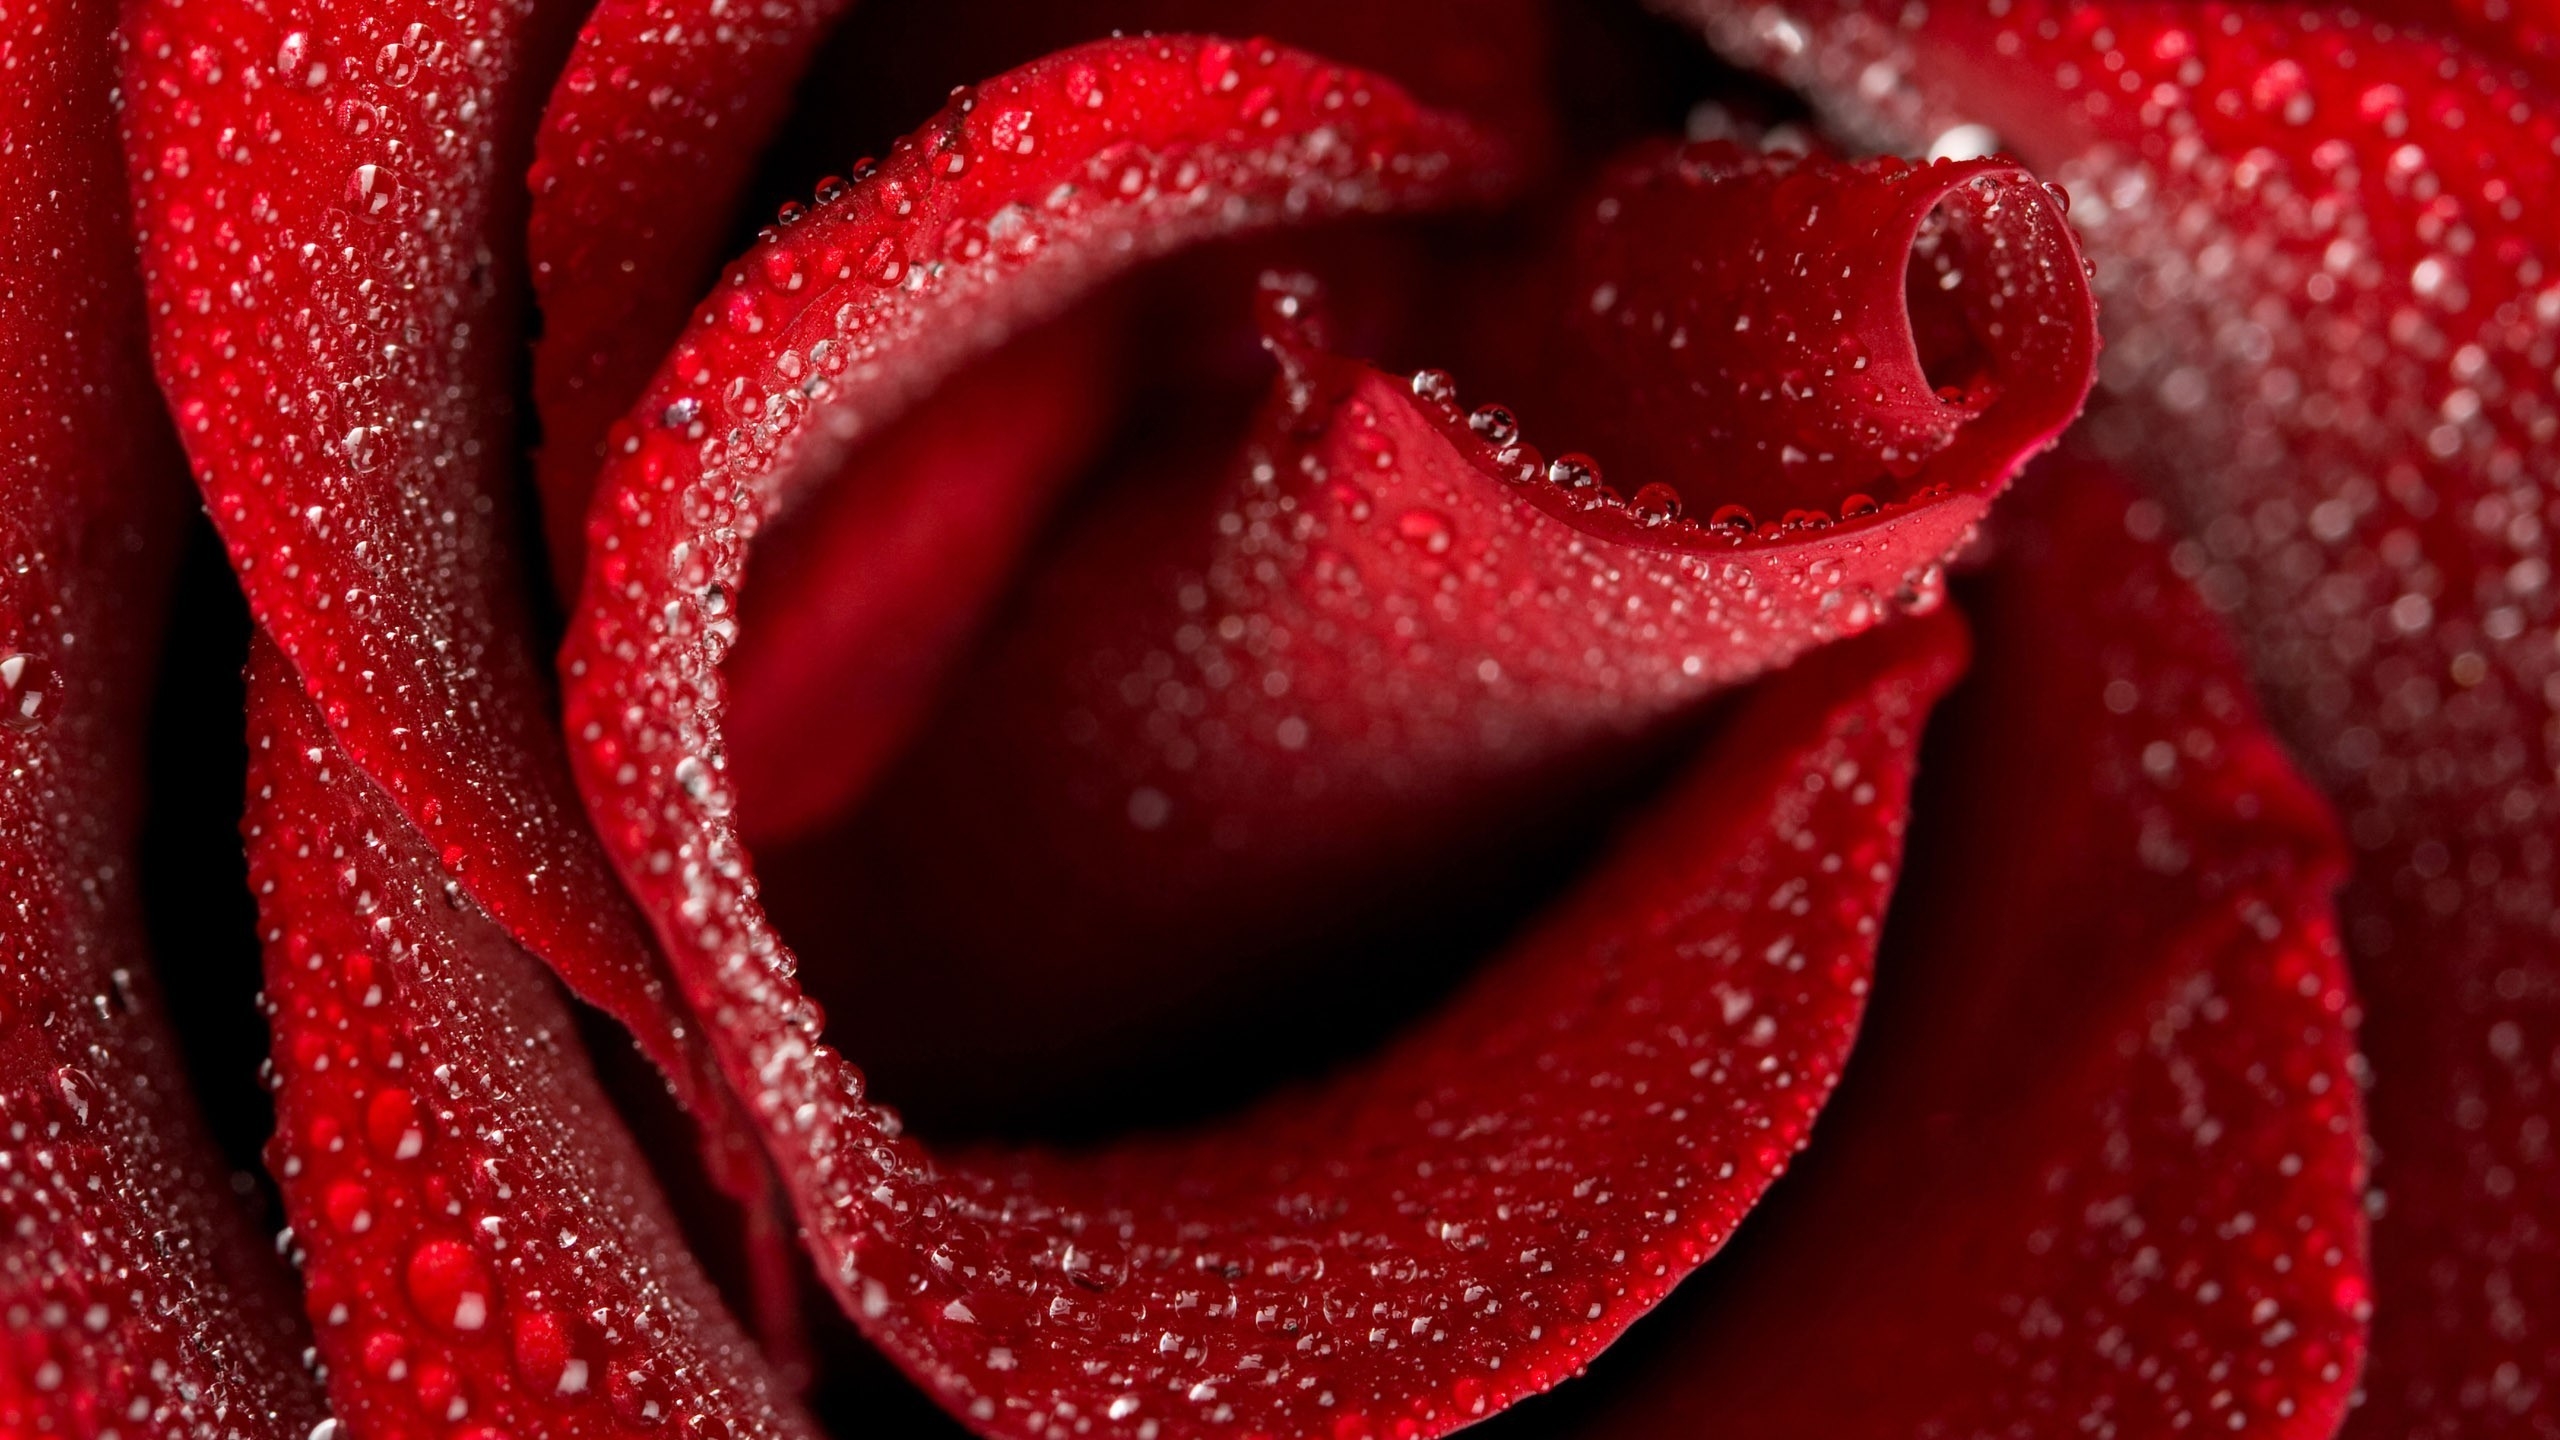 Beautiful Rose for 2560x1440 HDTV resolution